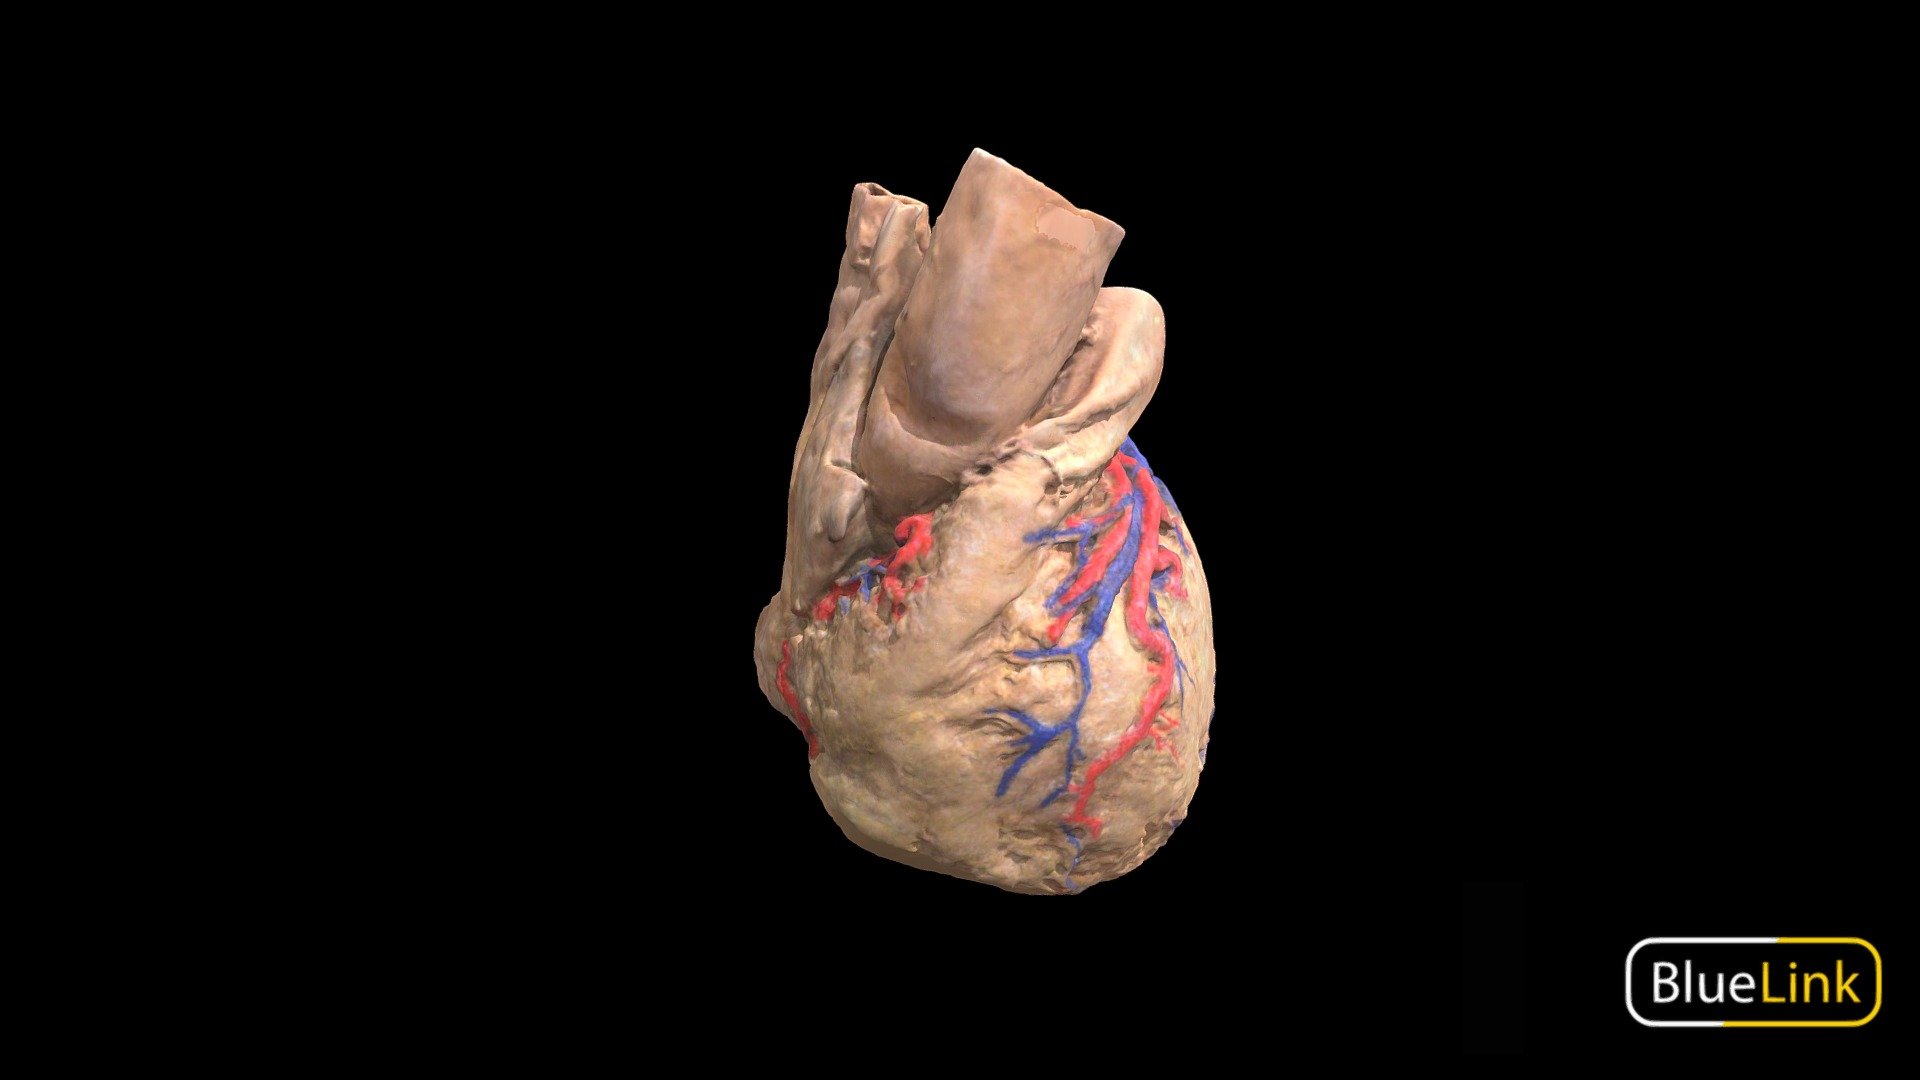 3D scan depicting the vascular supply of the human heart
Captured with: Einscan Pro
Captured by: Will Gribbin
Edited by: Cristina Prall
University of Michigan
21905-C01 - External Heart Vasculature - 3D model by Bluelink Anatomy - University of Michigan (@bluelinkanatomy) 3d model